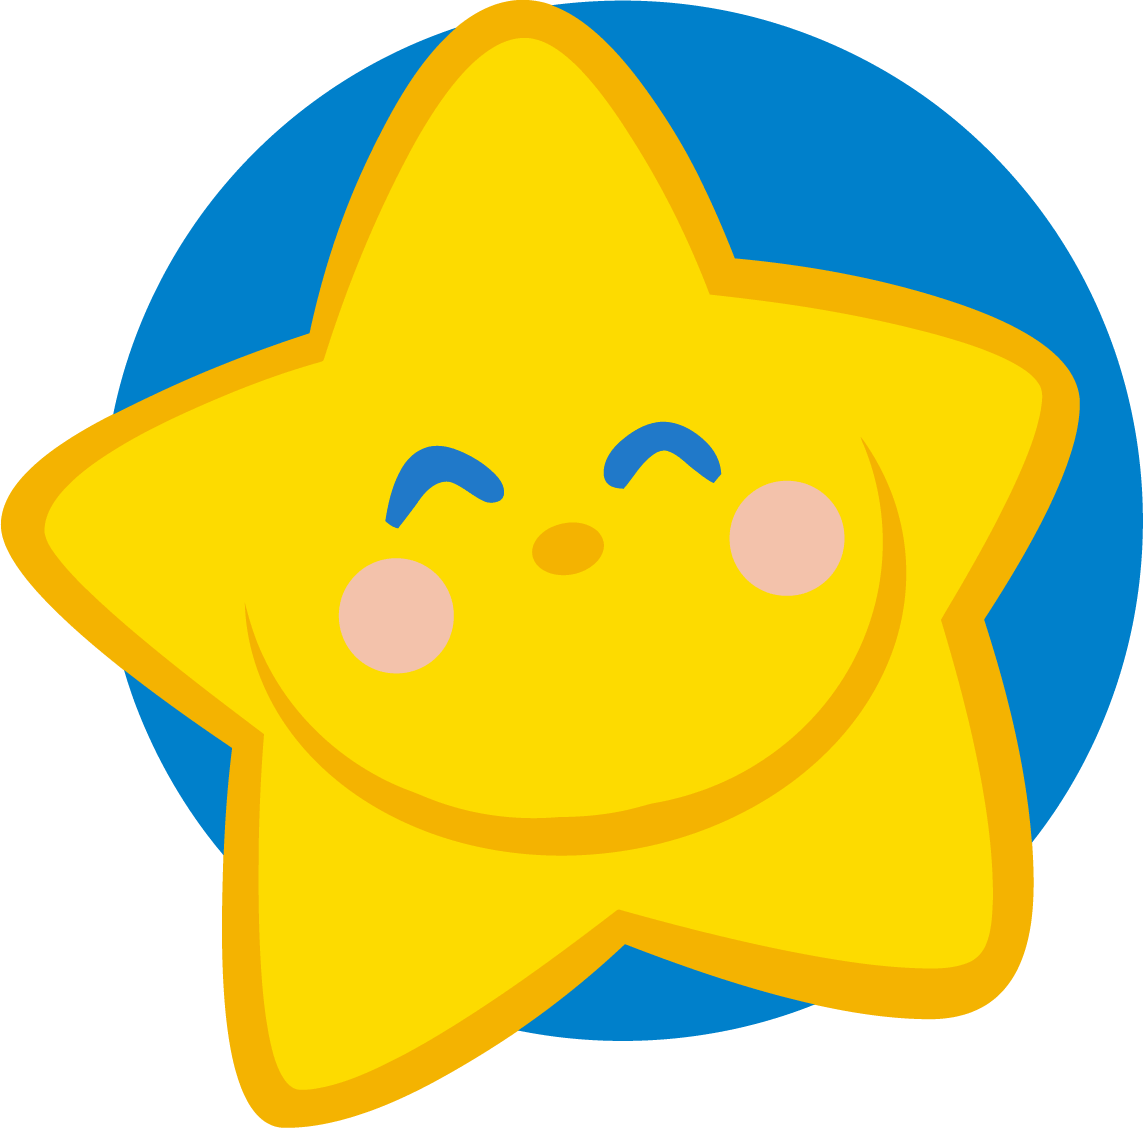 Cartoon Picture Of A Star Frees That You Can Download To Clipart ...